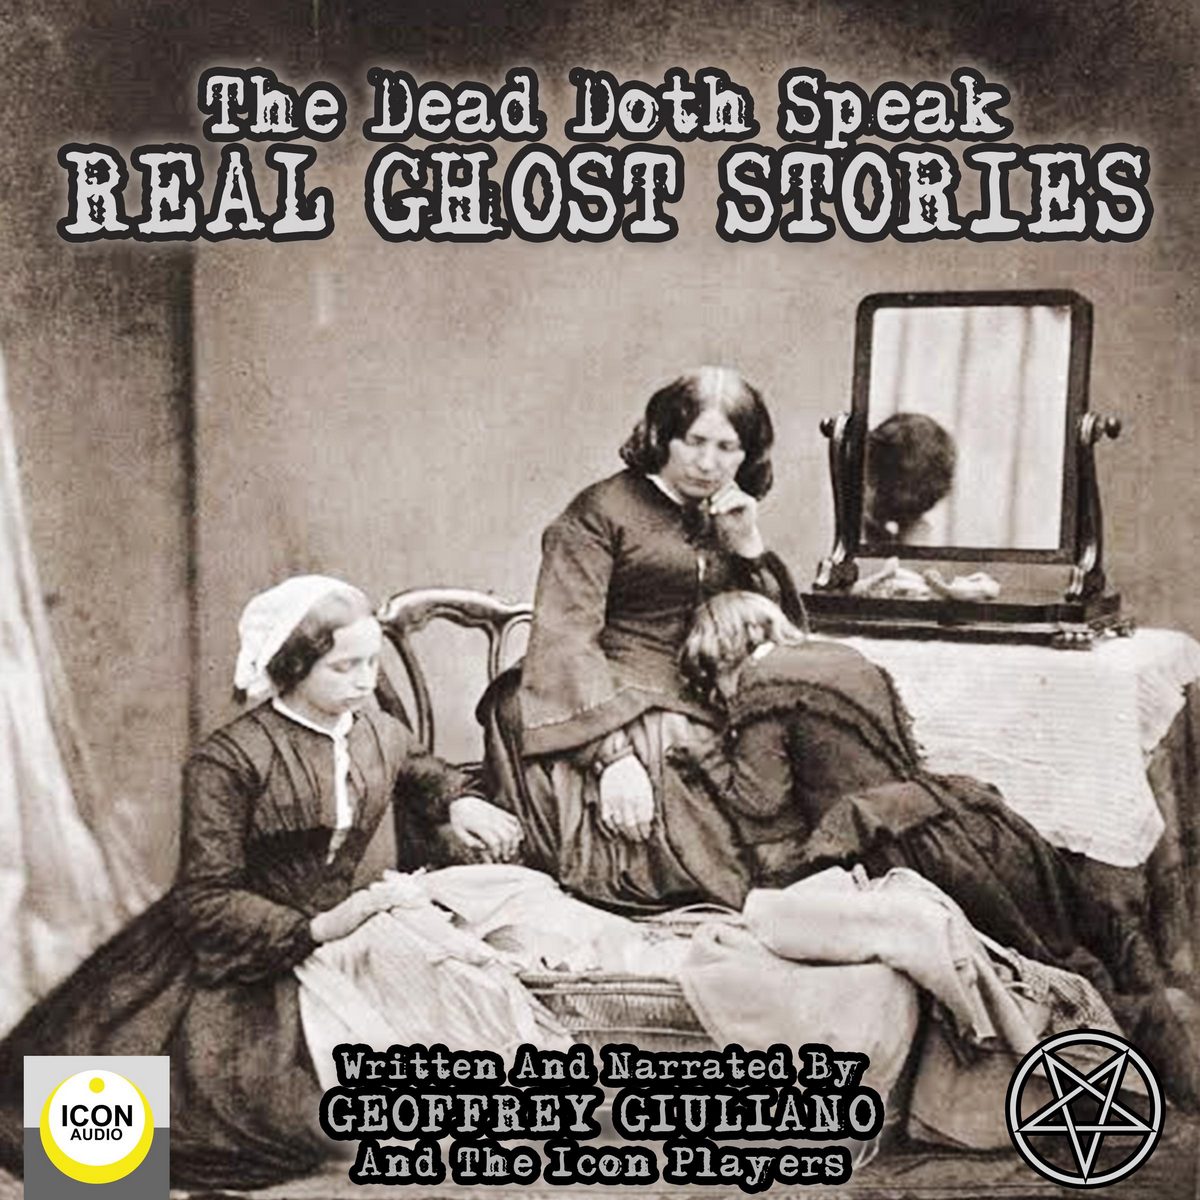 The Dead Doth Speak – Real Ghost Stories